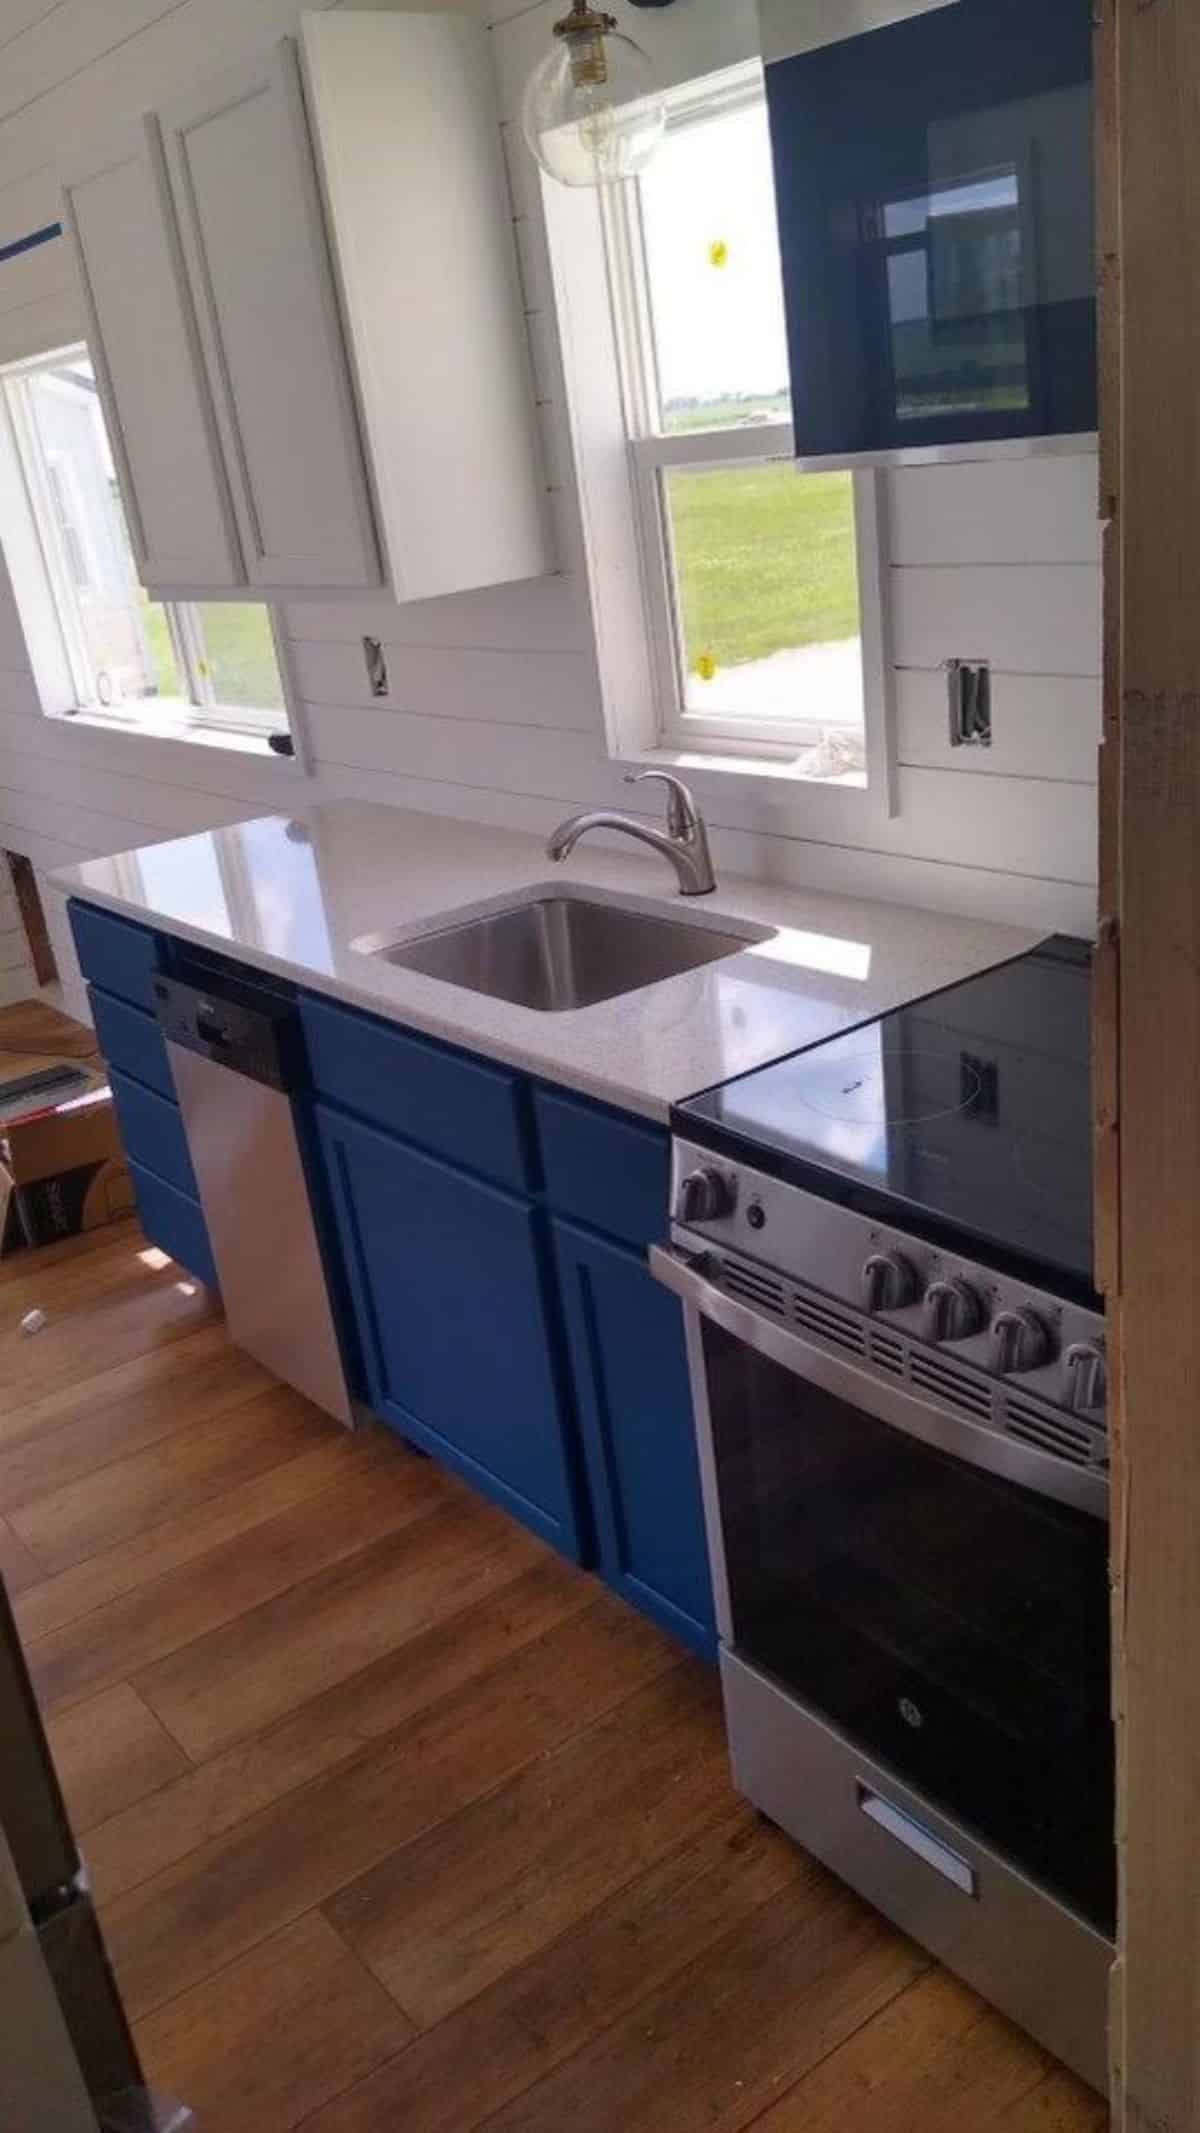 a microwave and 4 burner stove is included in this fully furnished tiny home